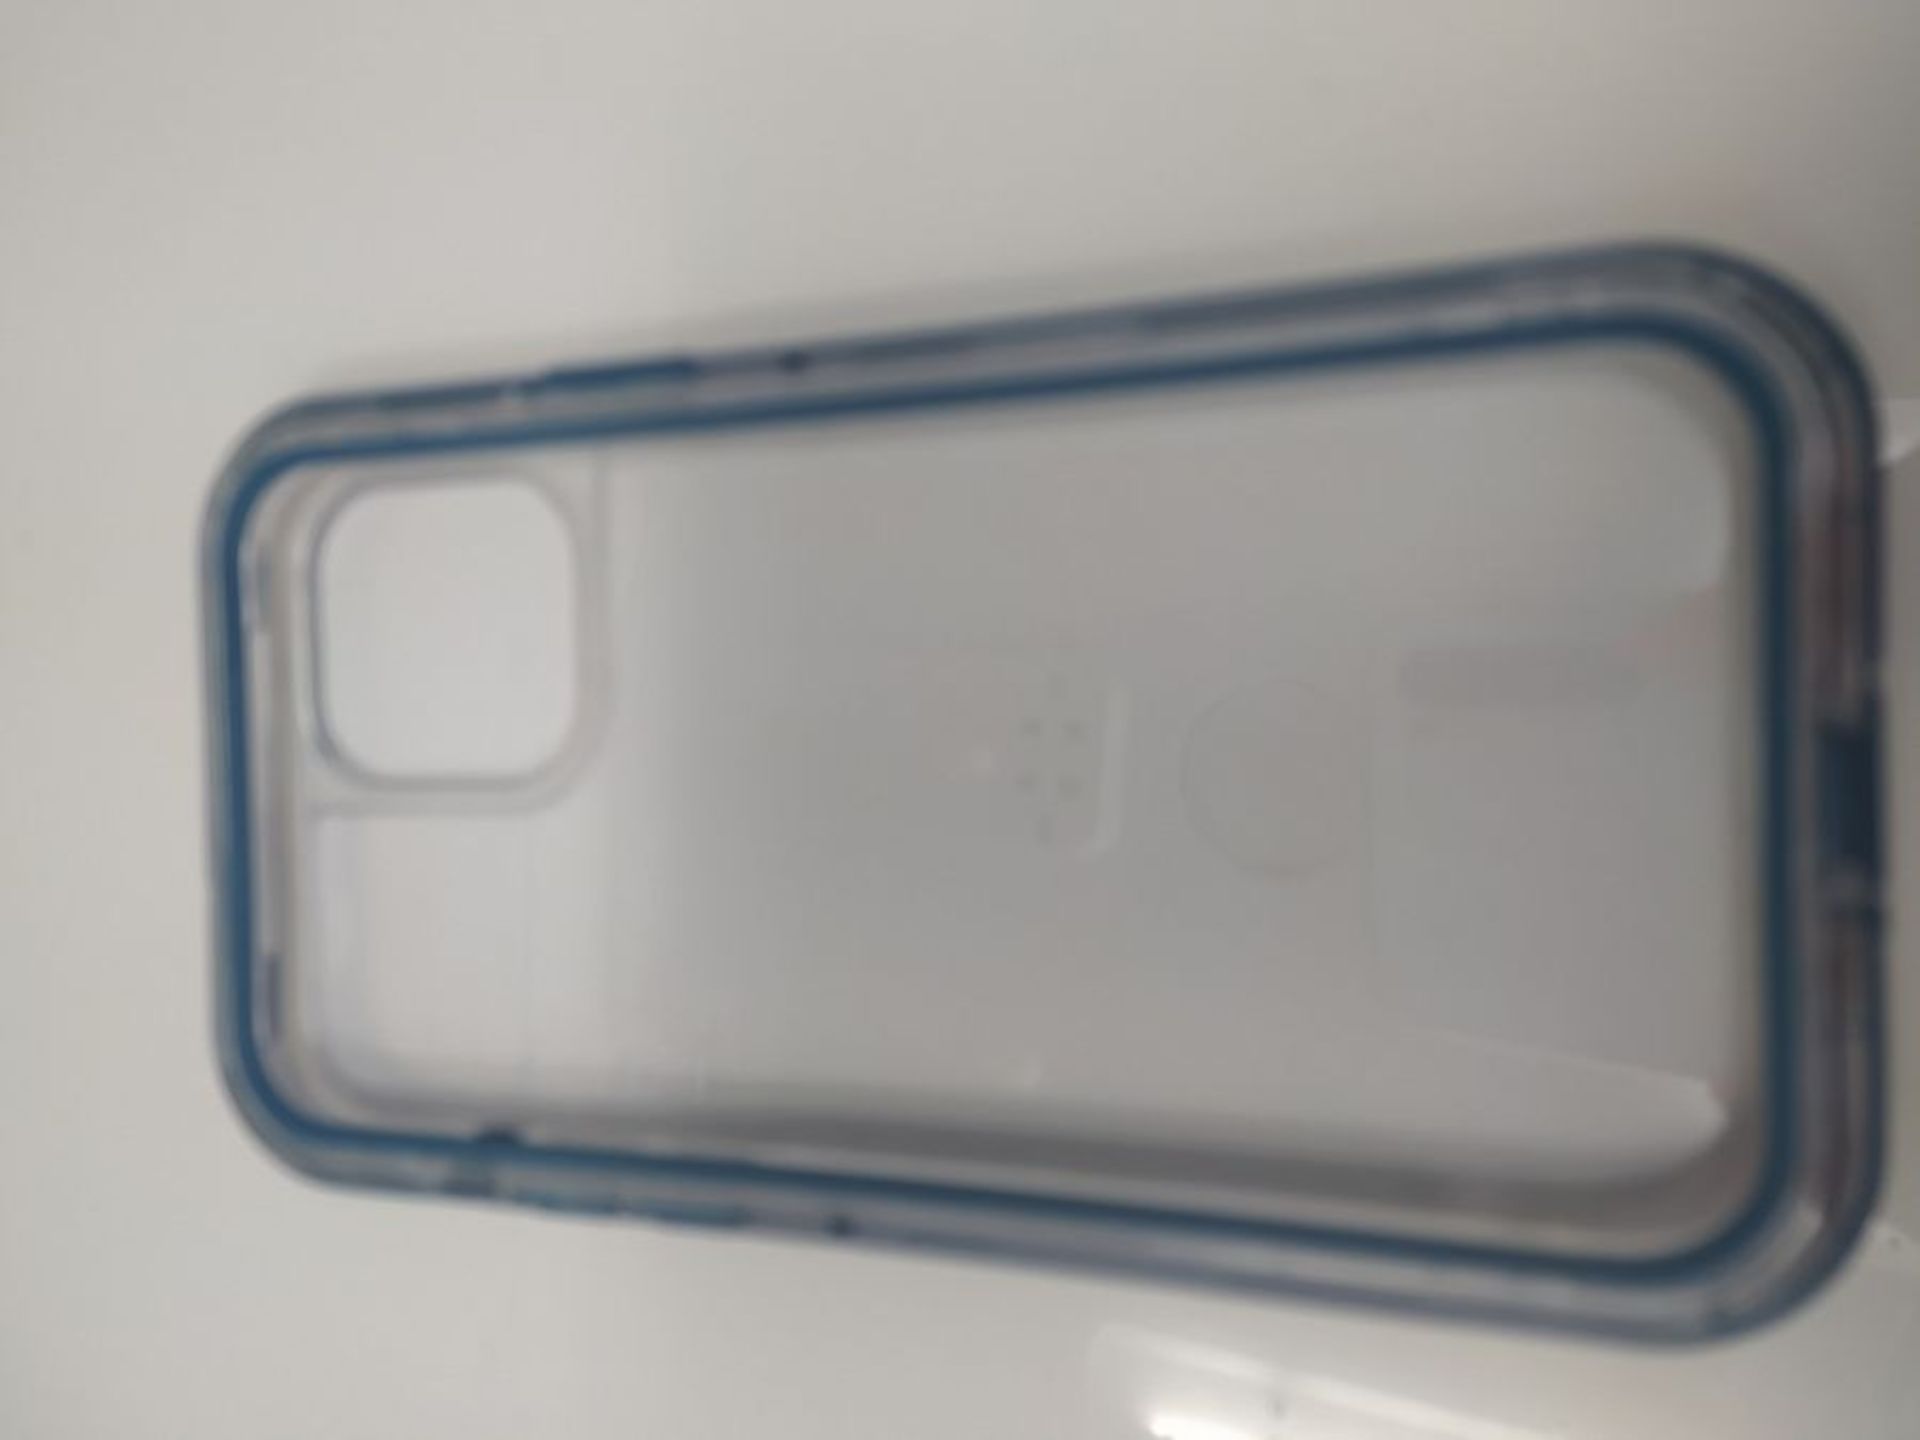 LifeProof for Apple iPhone 12/iPhone 12 Pro, Slim DropProof, DustProof and SnowProof C - Image 2 of 2